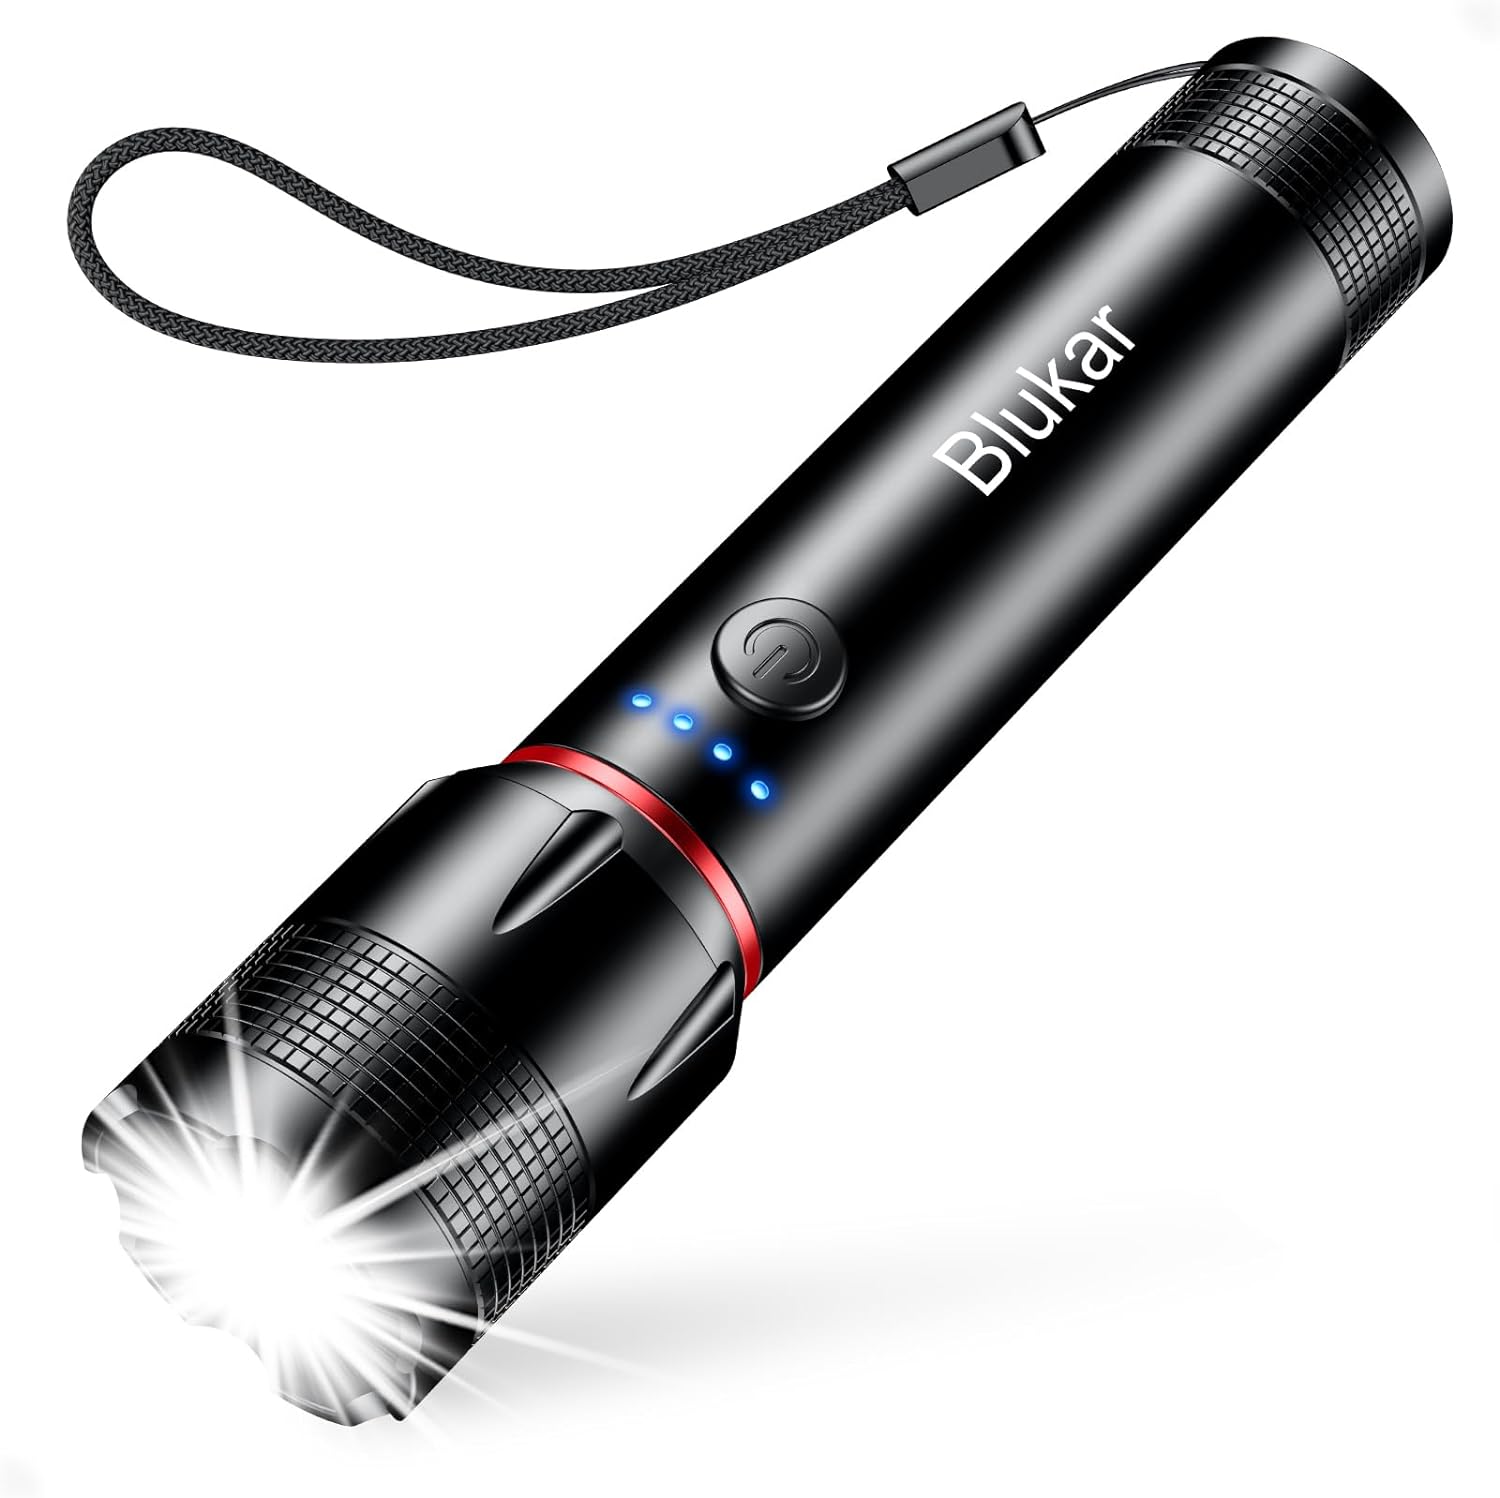 Blukar LED Torch Rechargeable Waterproof, Super Bright Adjustable Focus Flashlight with 5 Light Modes & Power Indicator